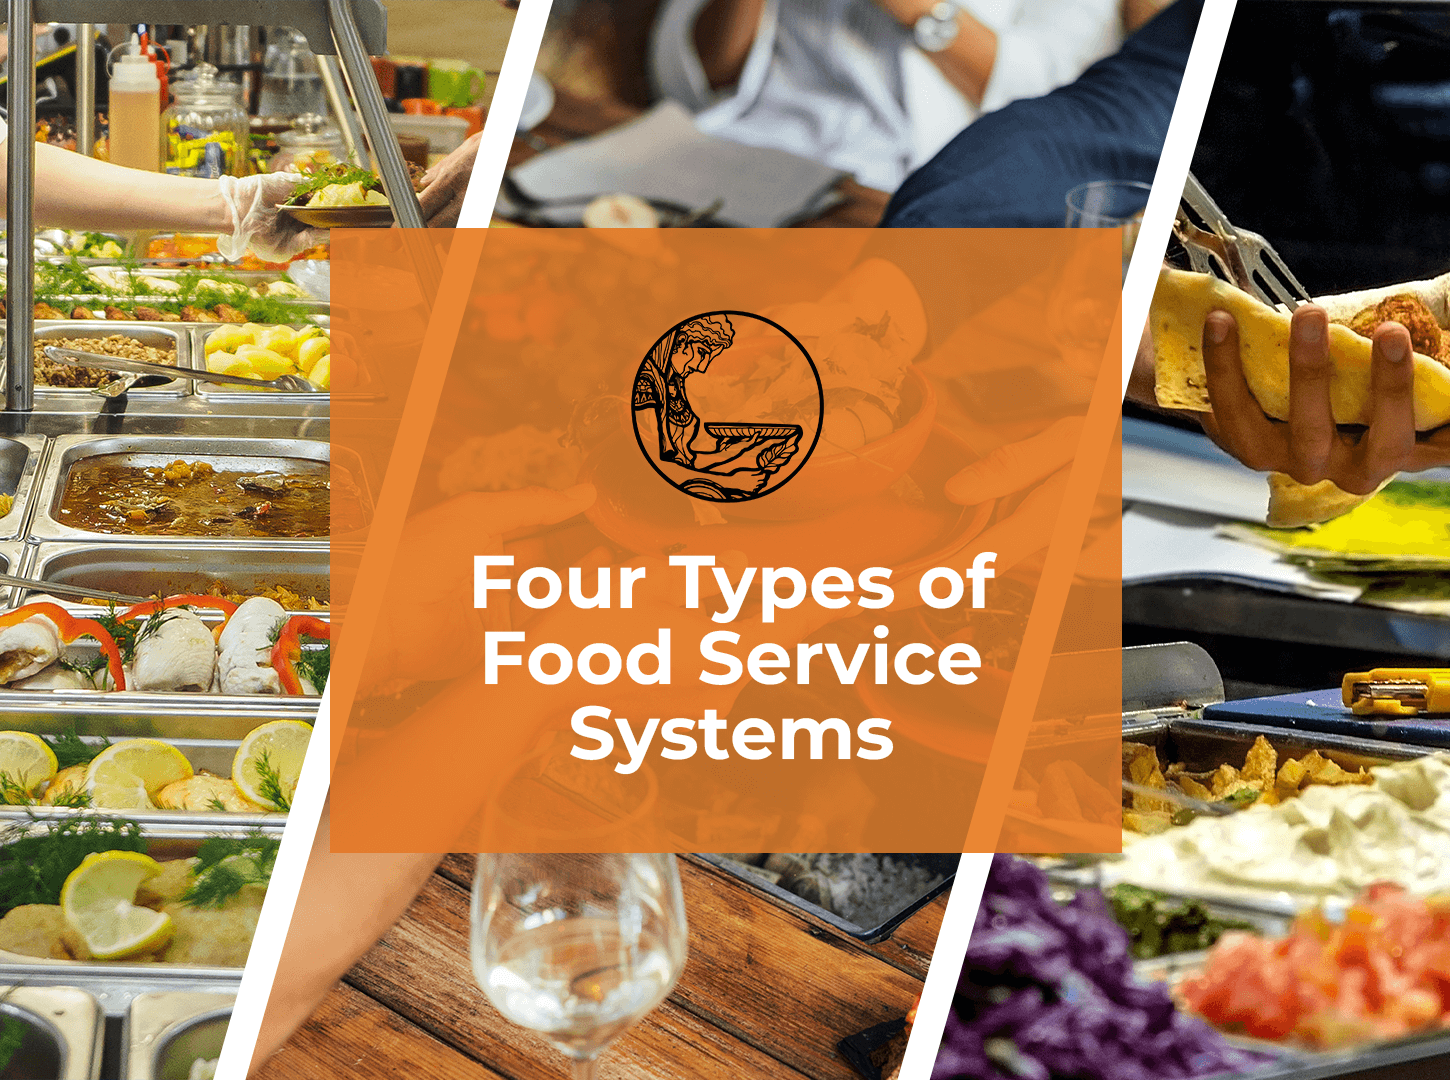 Featured image for “4 Types of Food Service Systems”